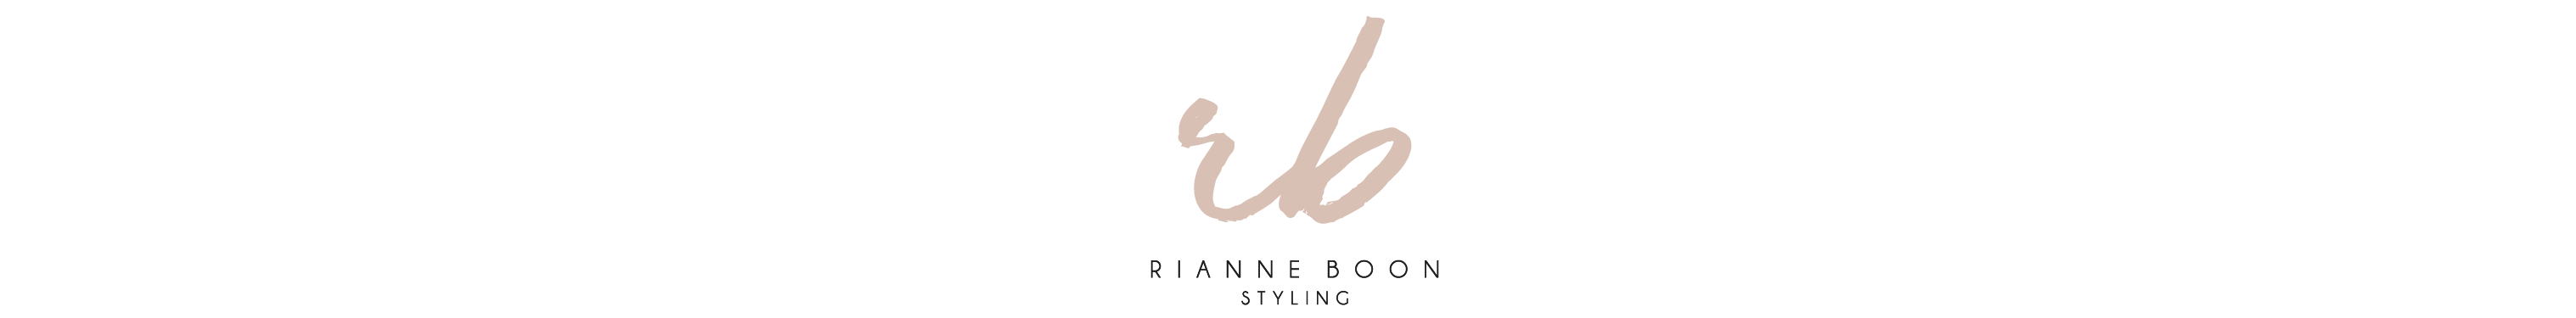 Rianne Boon Styling - 